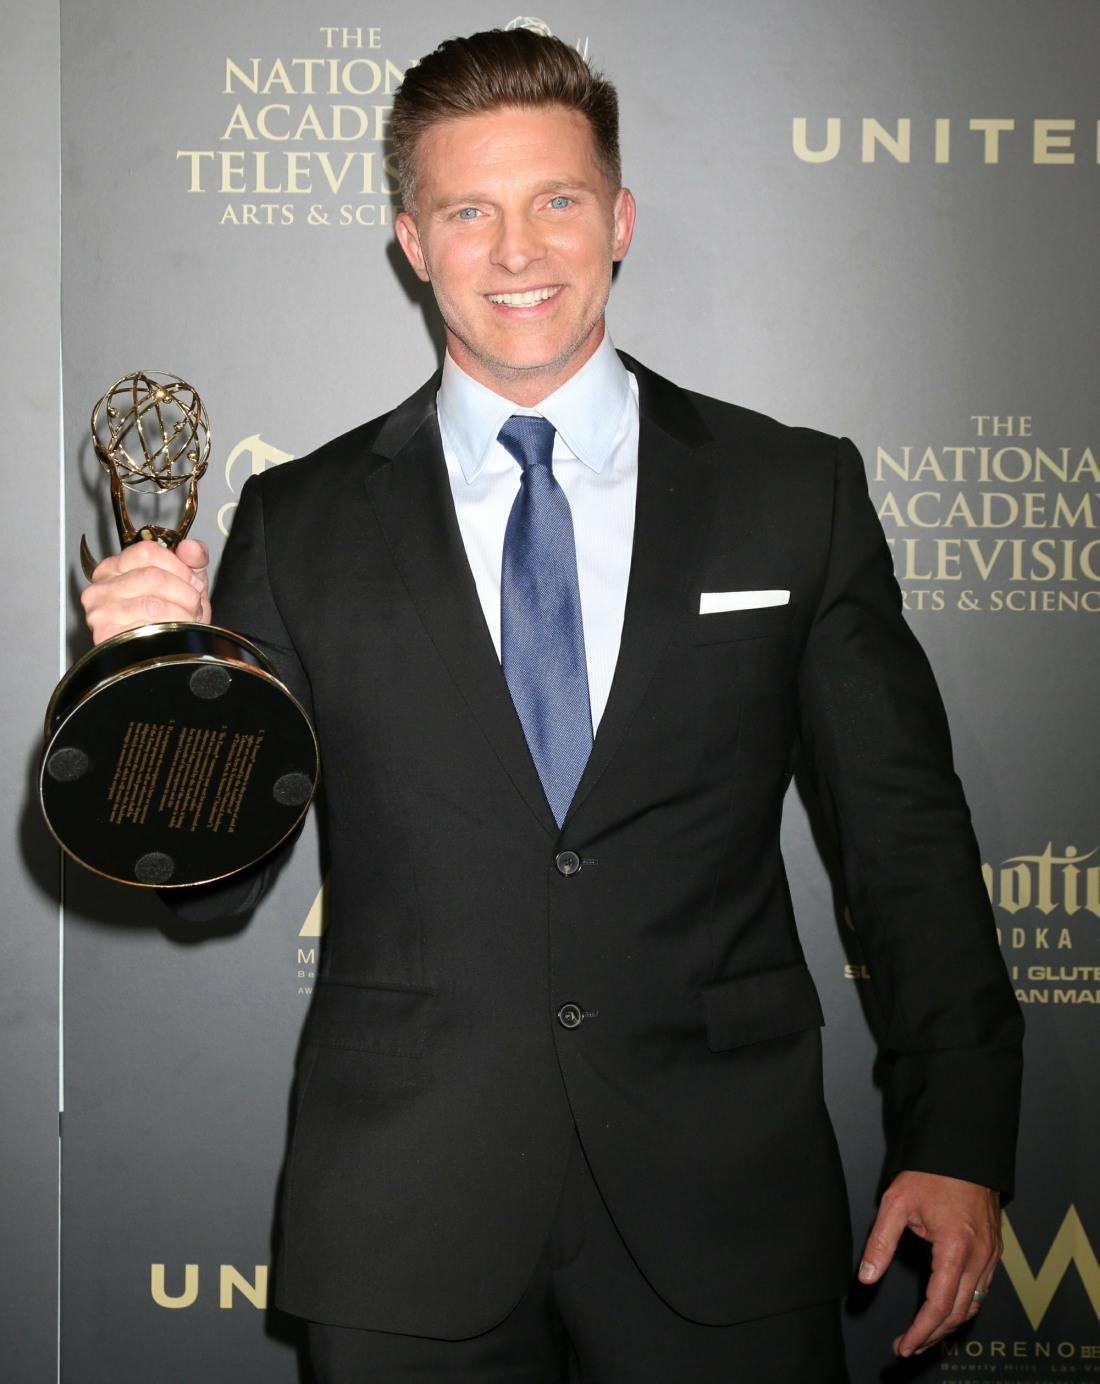 Steve Burton, Best Supporting Actor for The Young and The Restless  at the 44th Daytime Emmy Awards - Press Room, Pasadena Civic Auditorium, Pasadena, CA 04-30-17